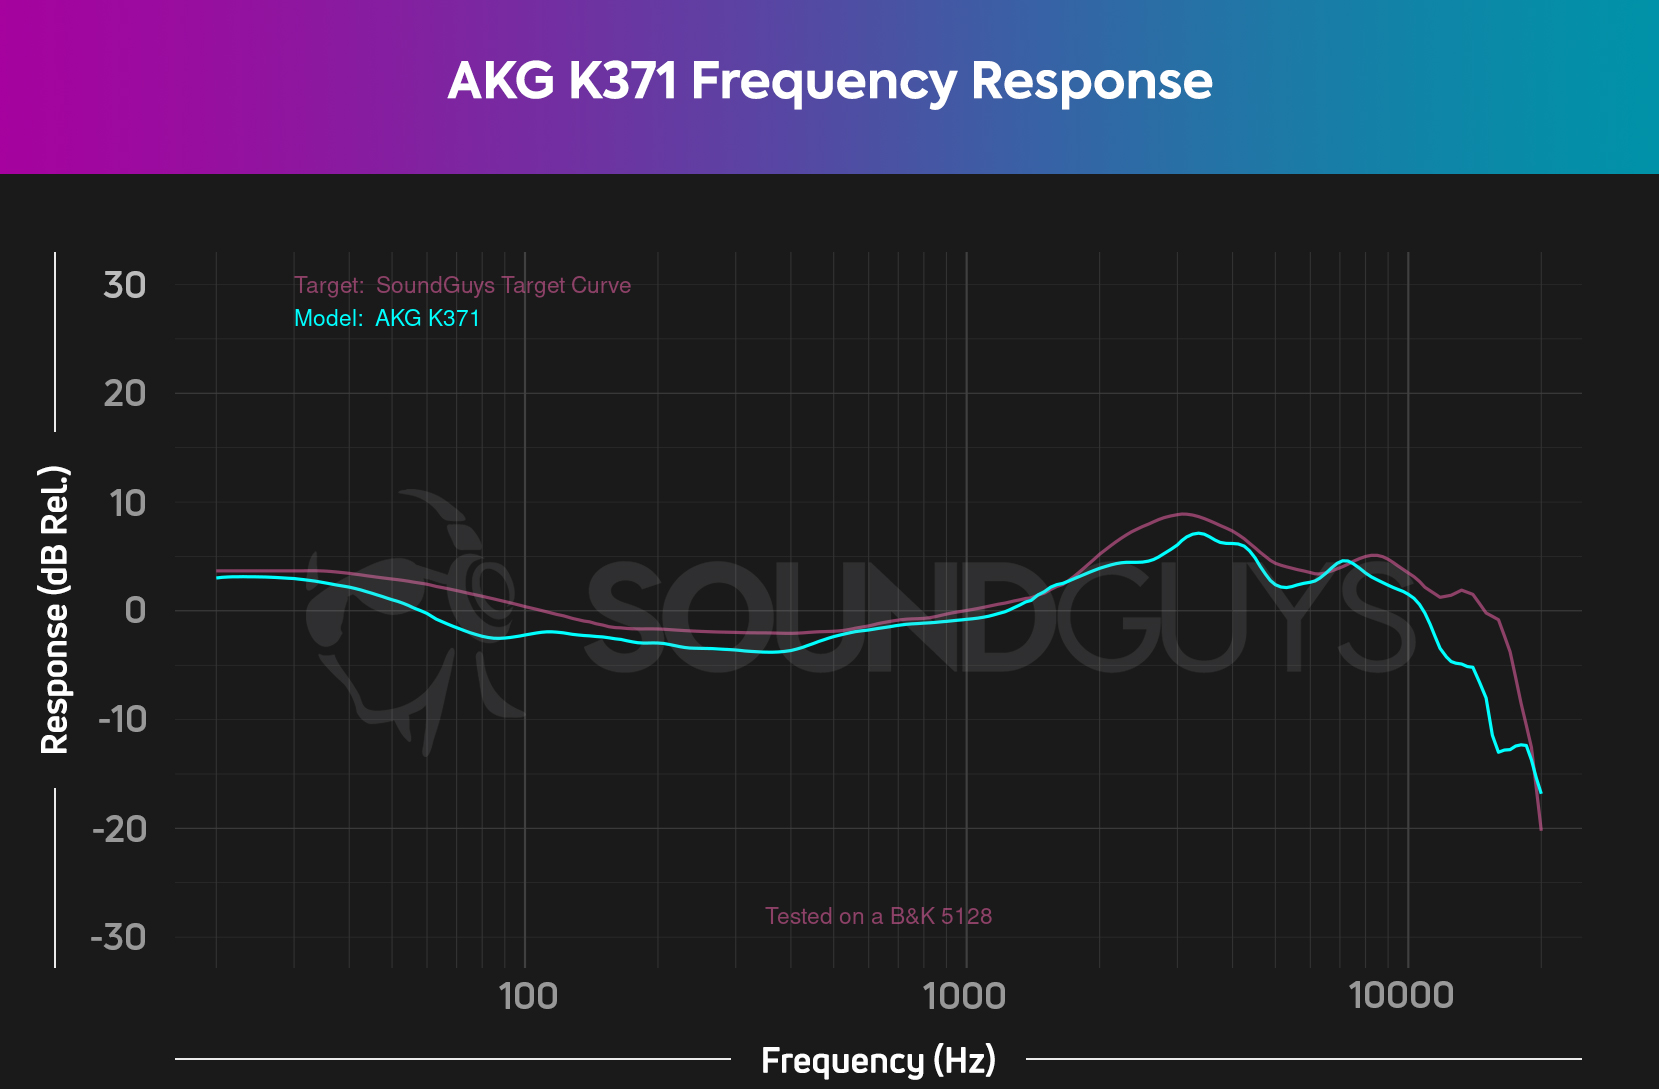 A chart depicts the AKG K371 frequency response compared to the SoundGuys Target Curve.